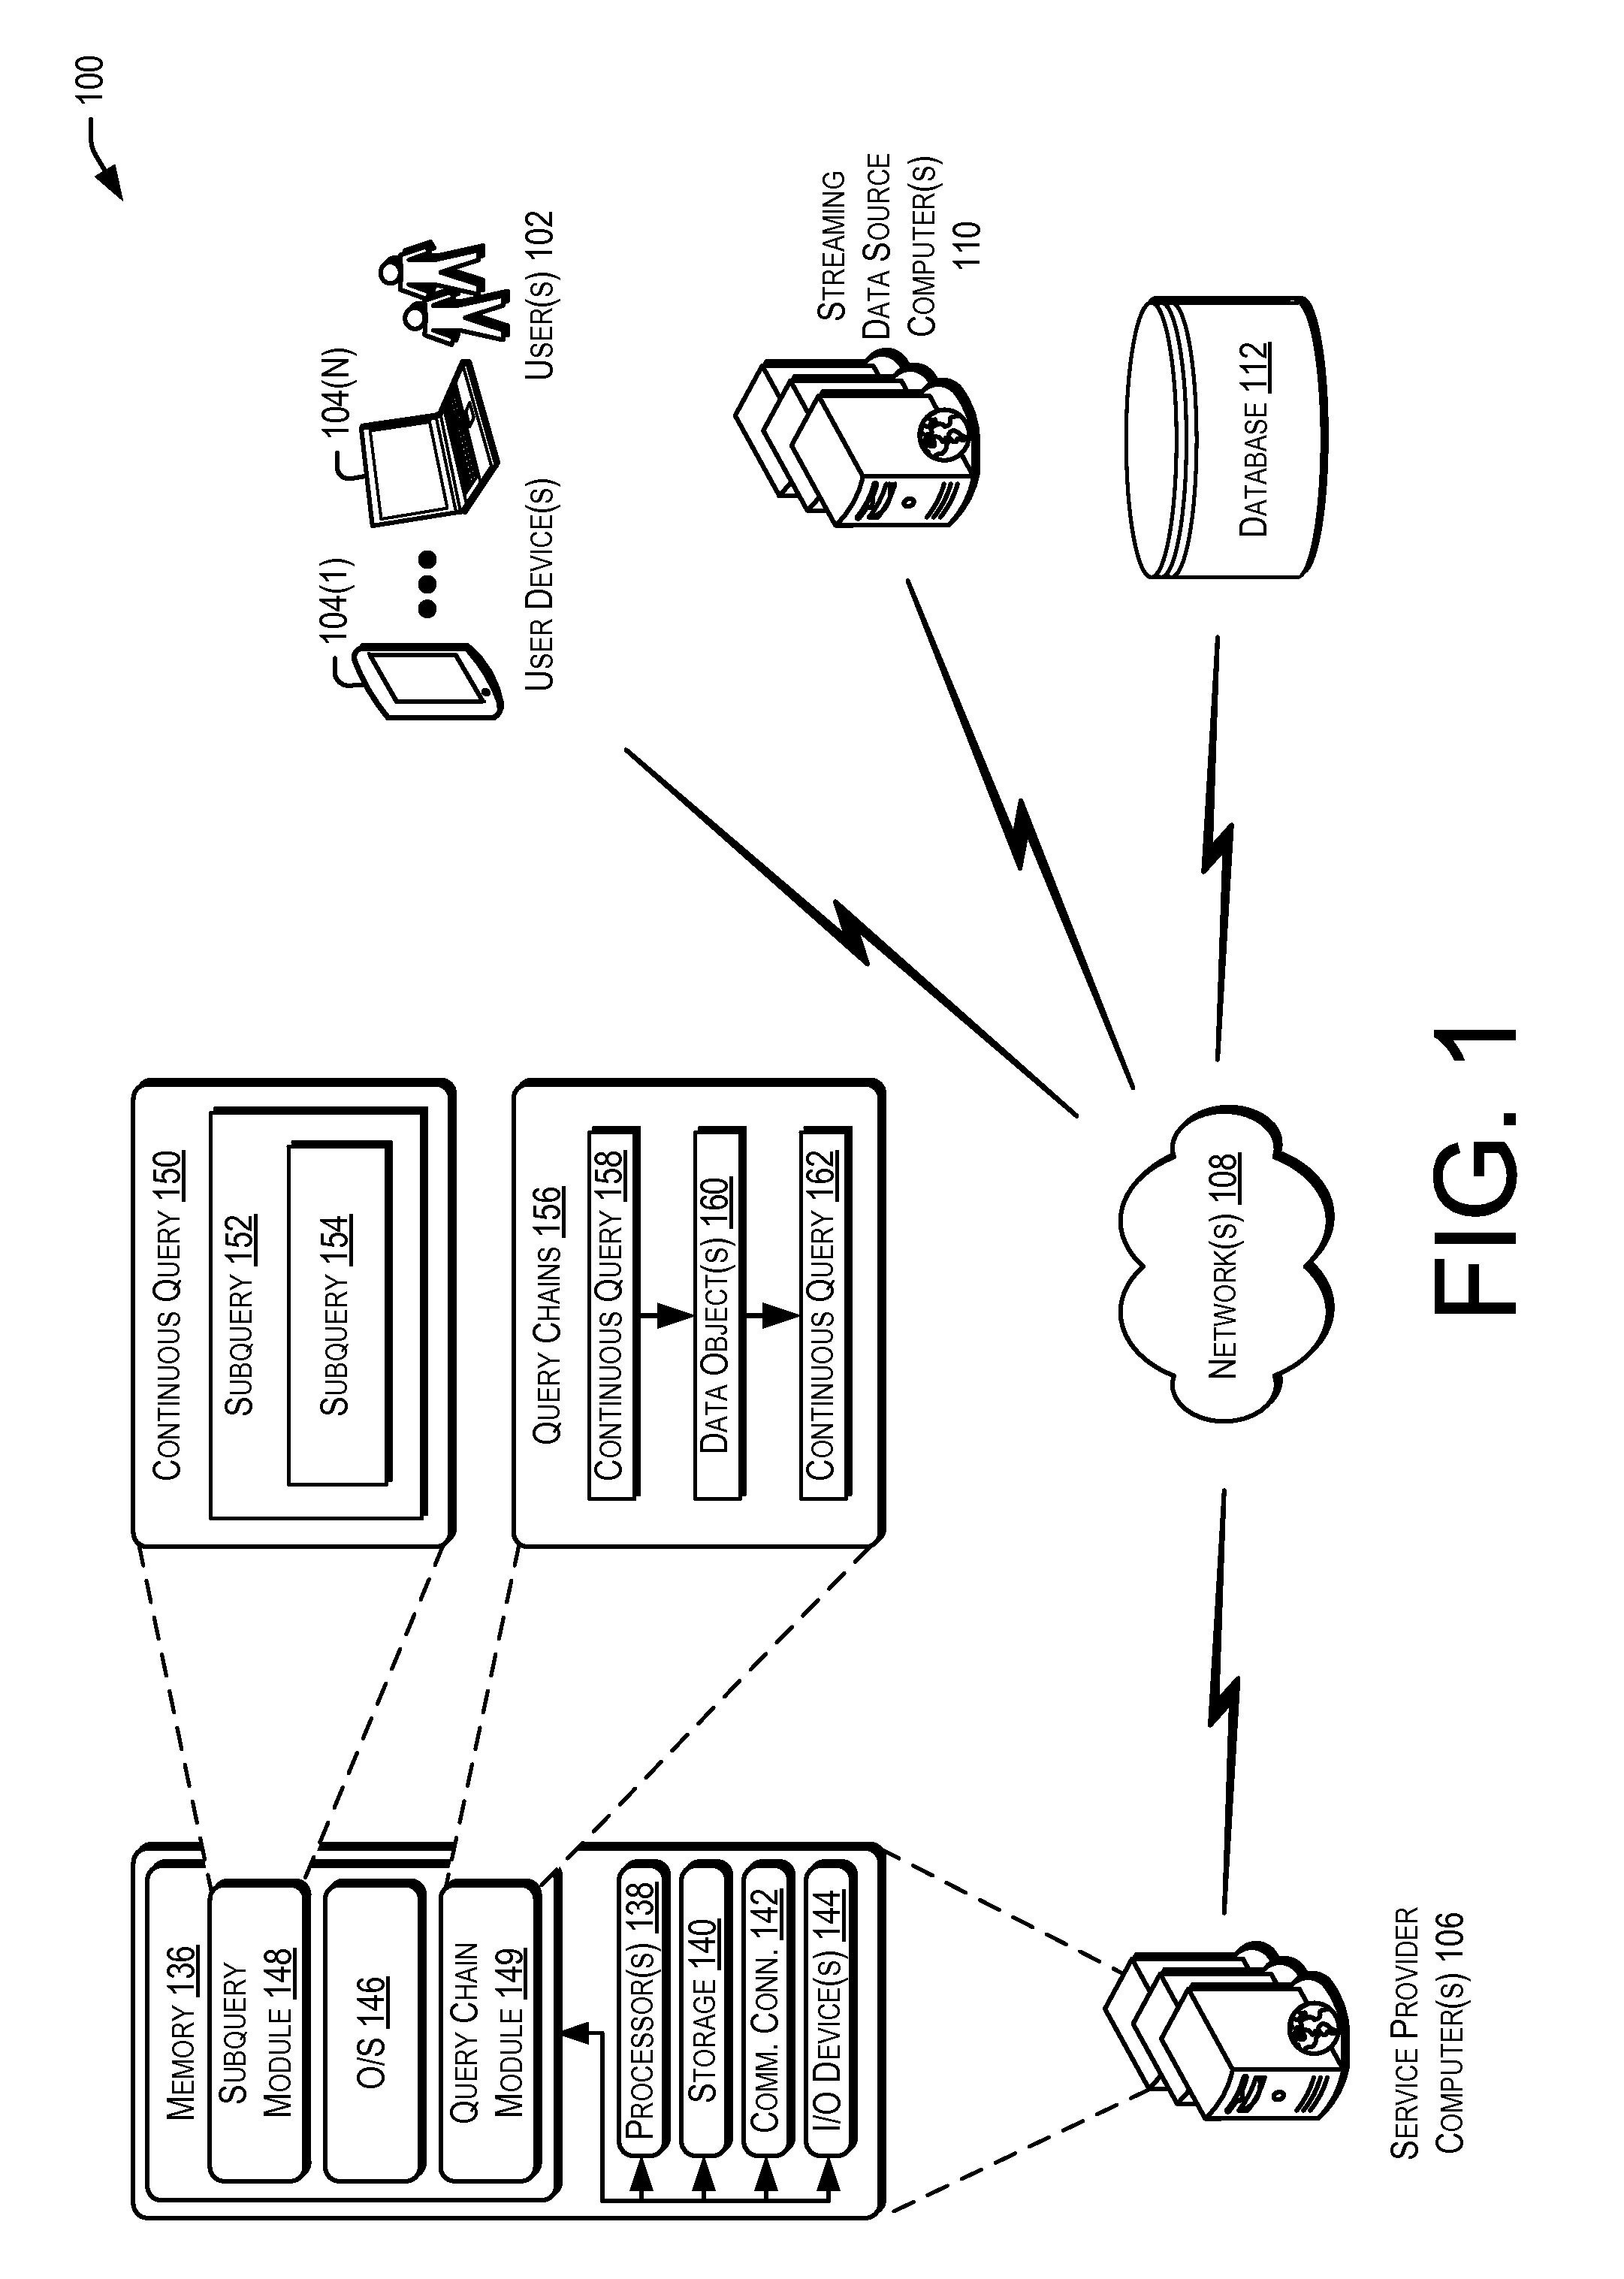 Mechanism to chain continuous queries